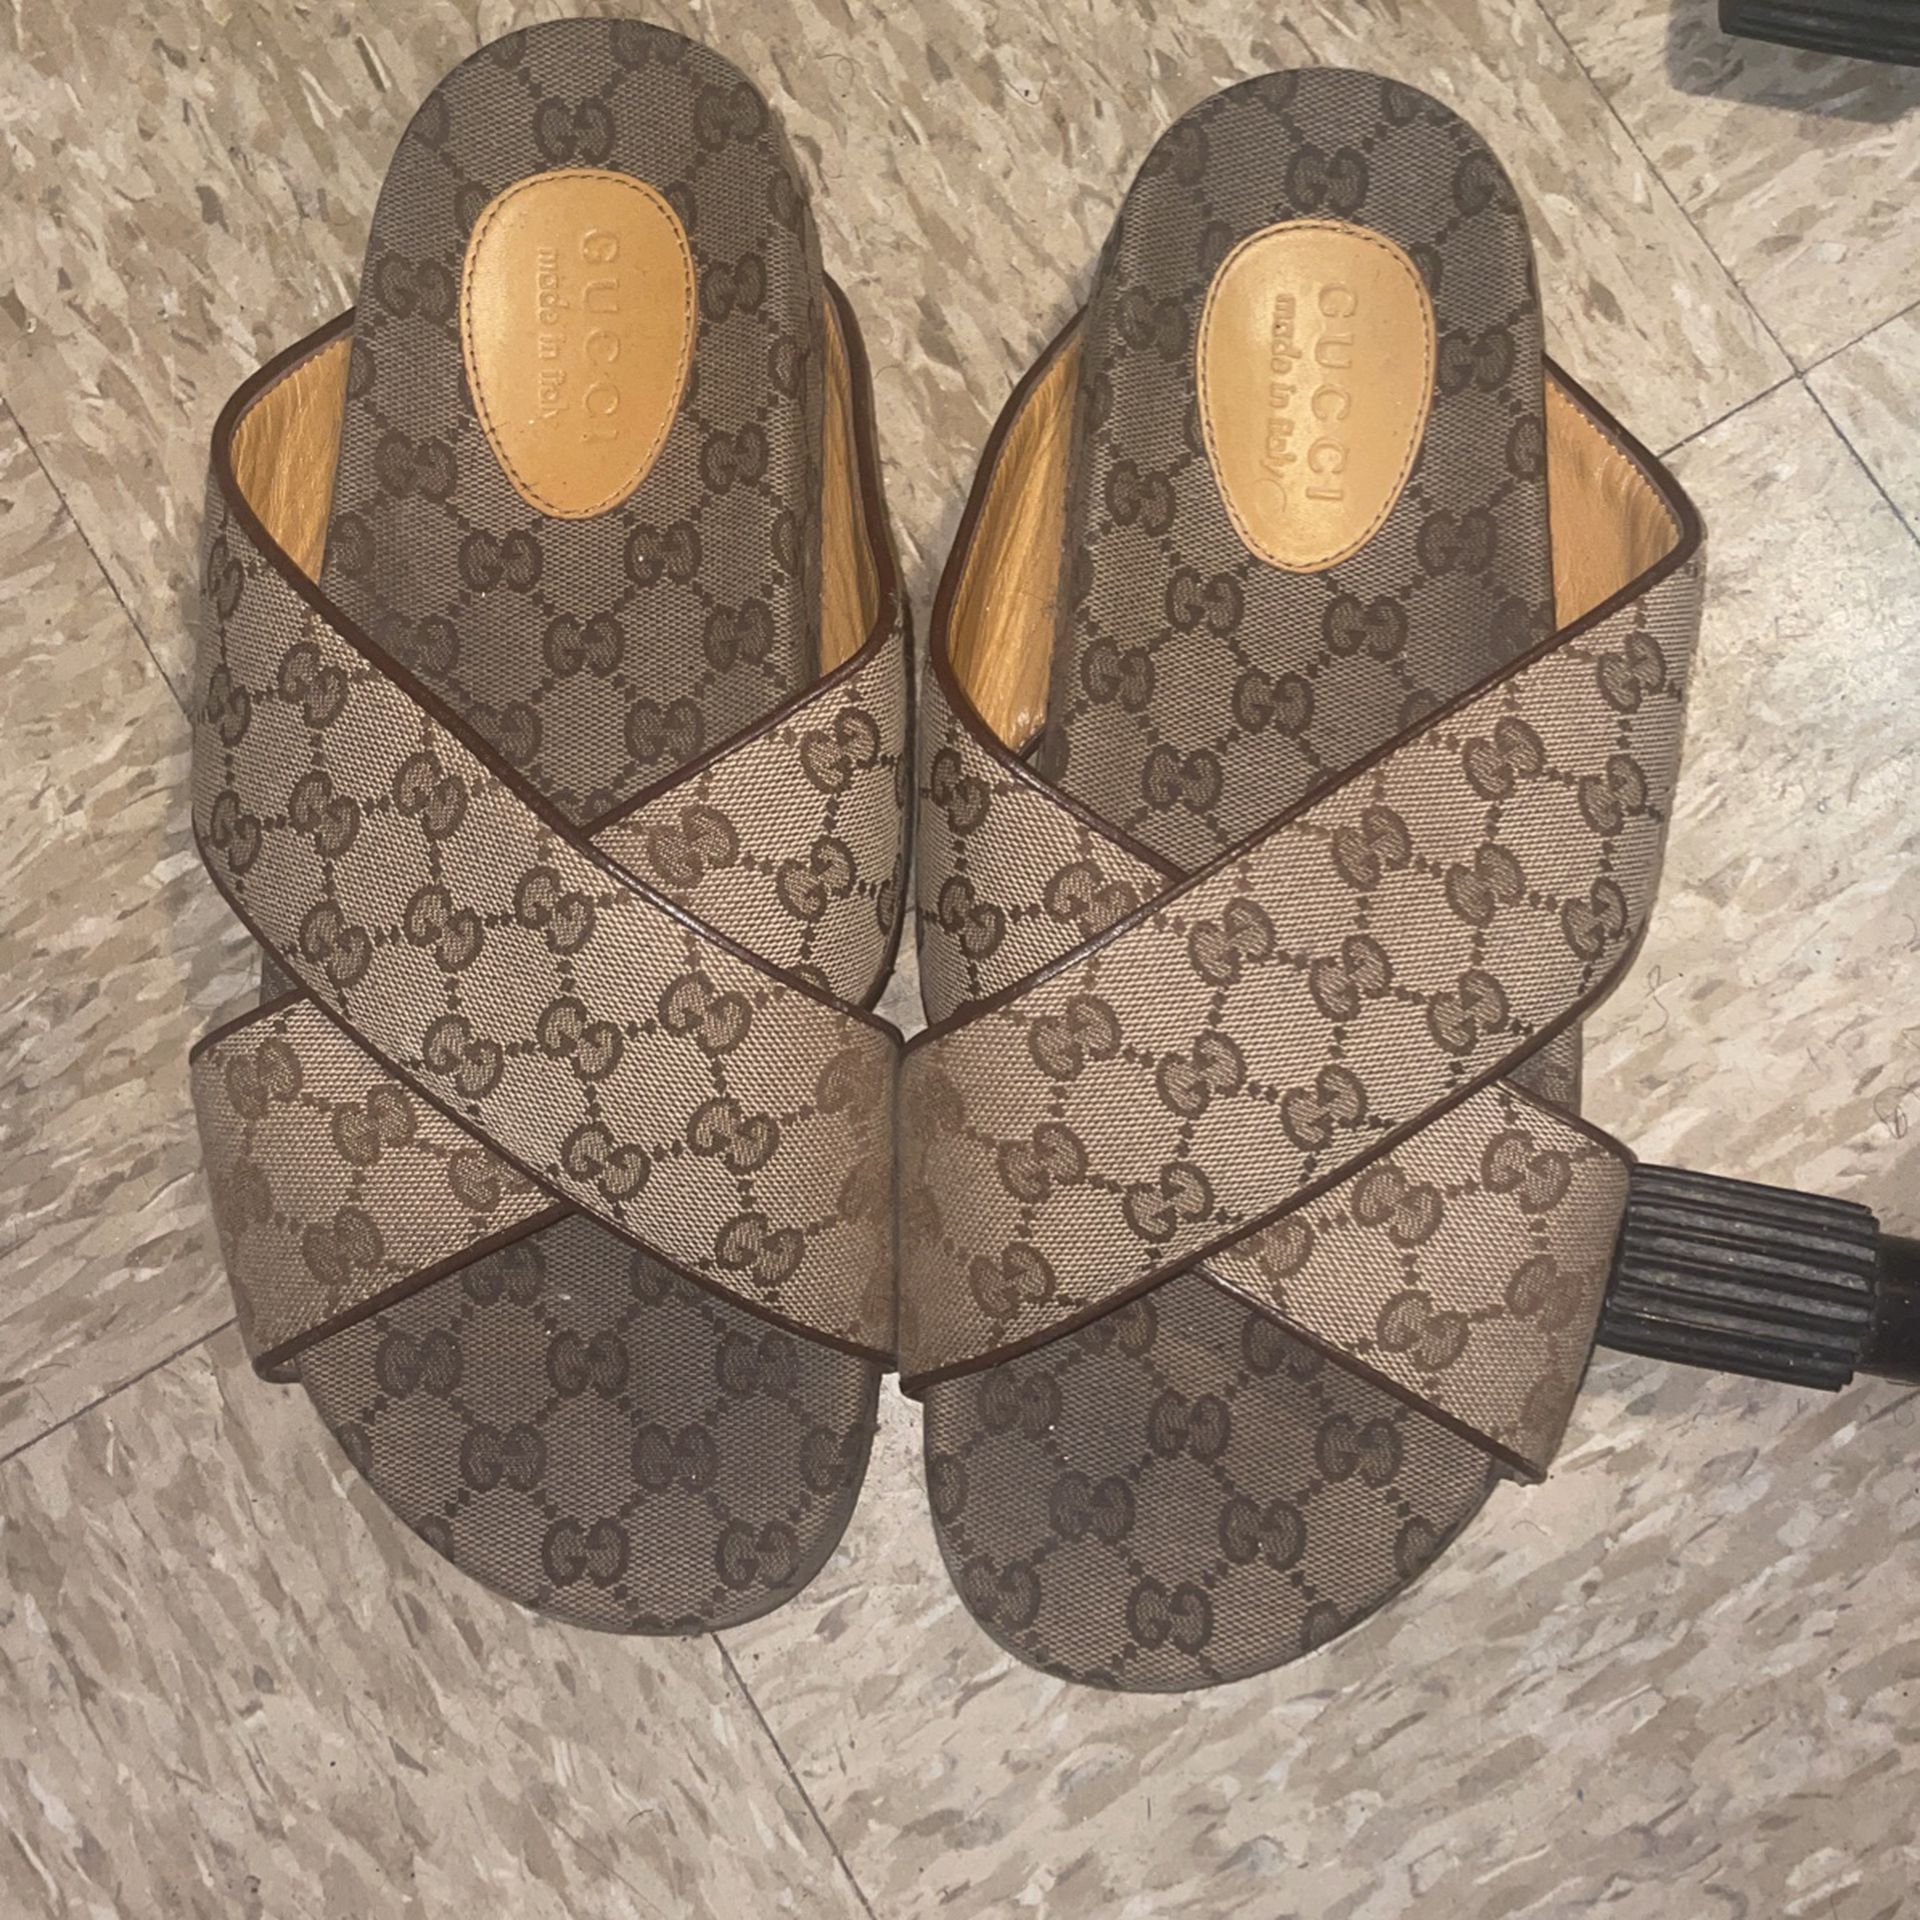 Sandals Sale in New York, NY OfferUp